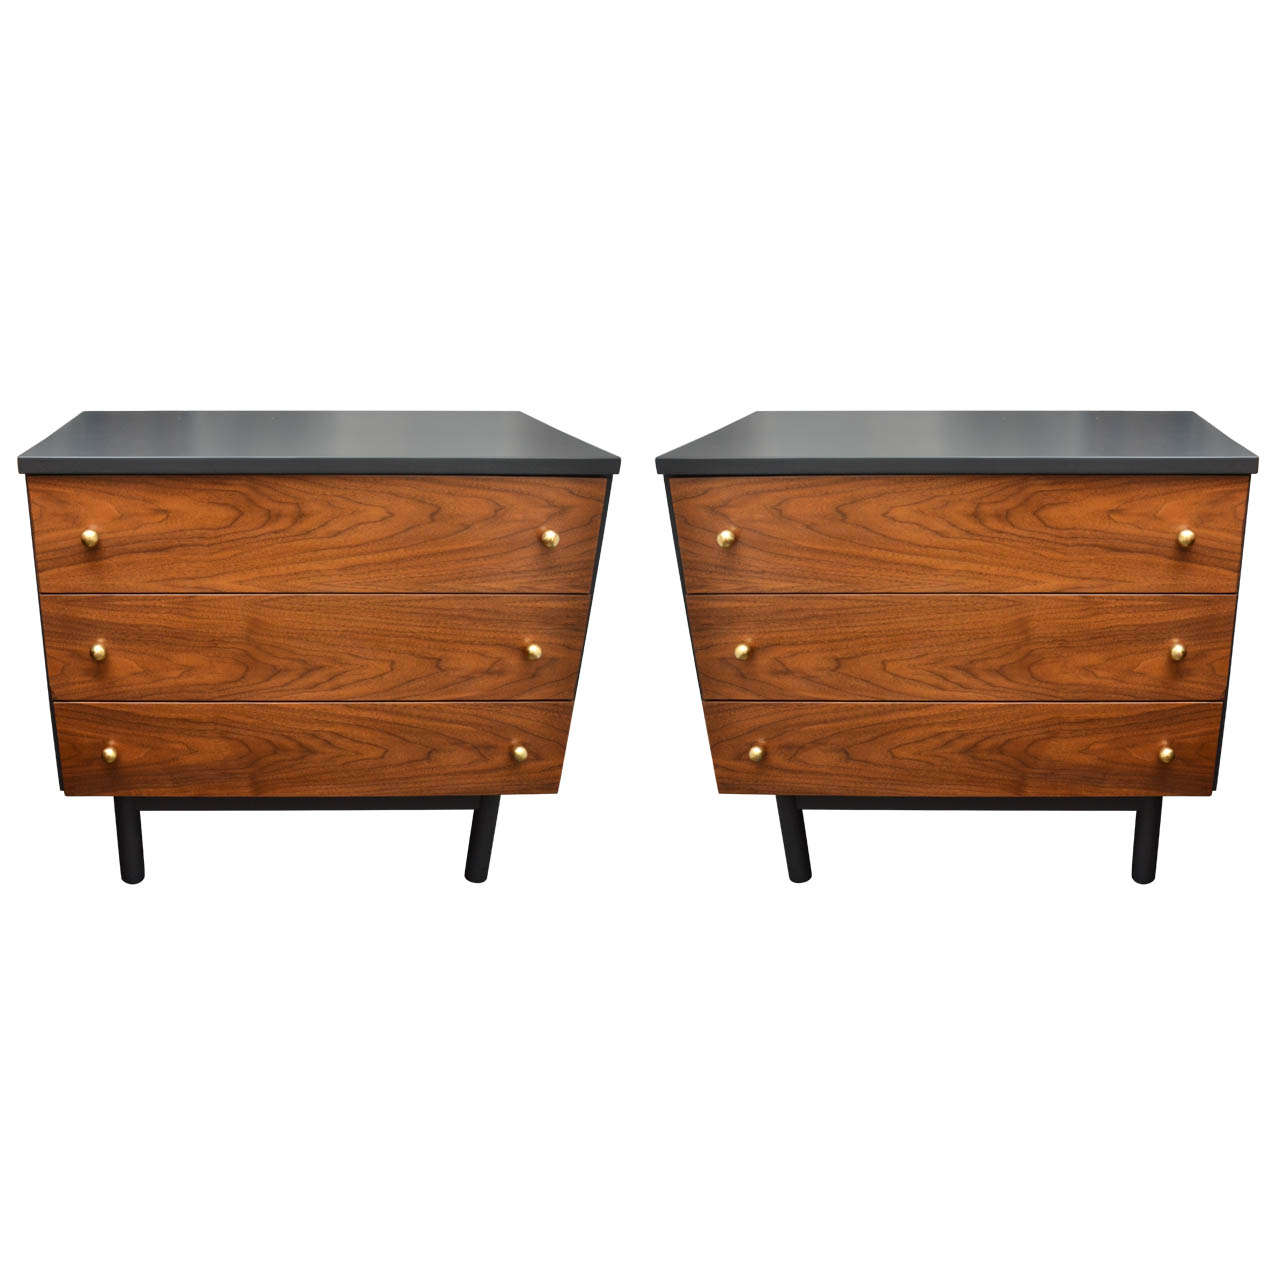 Pair of Grey + Walnut Chests by Paul McCobb